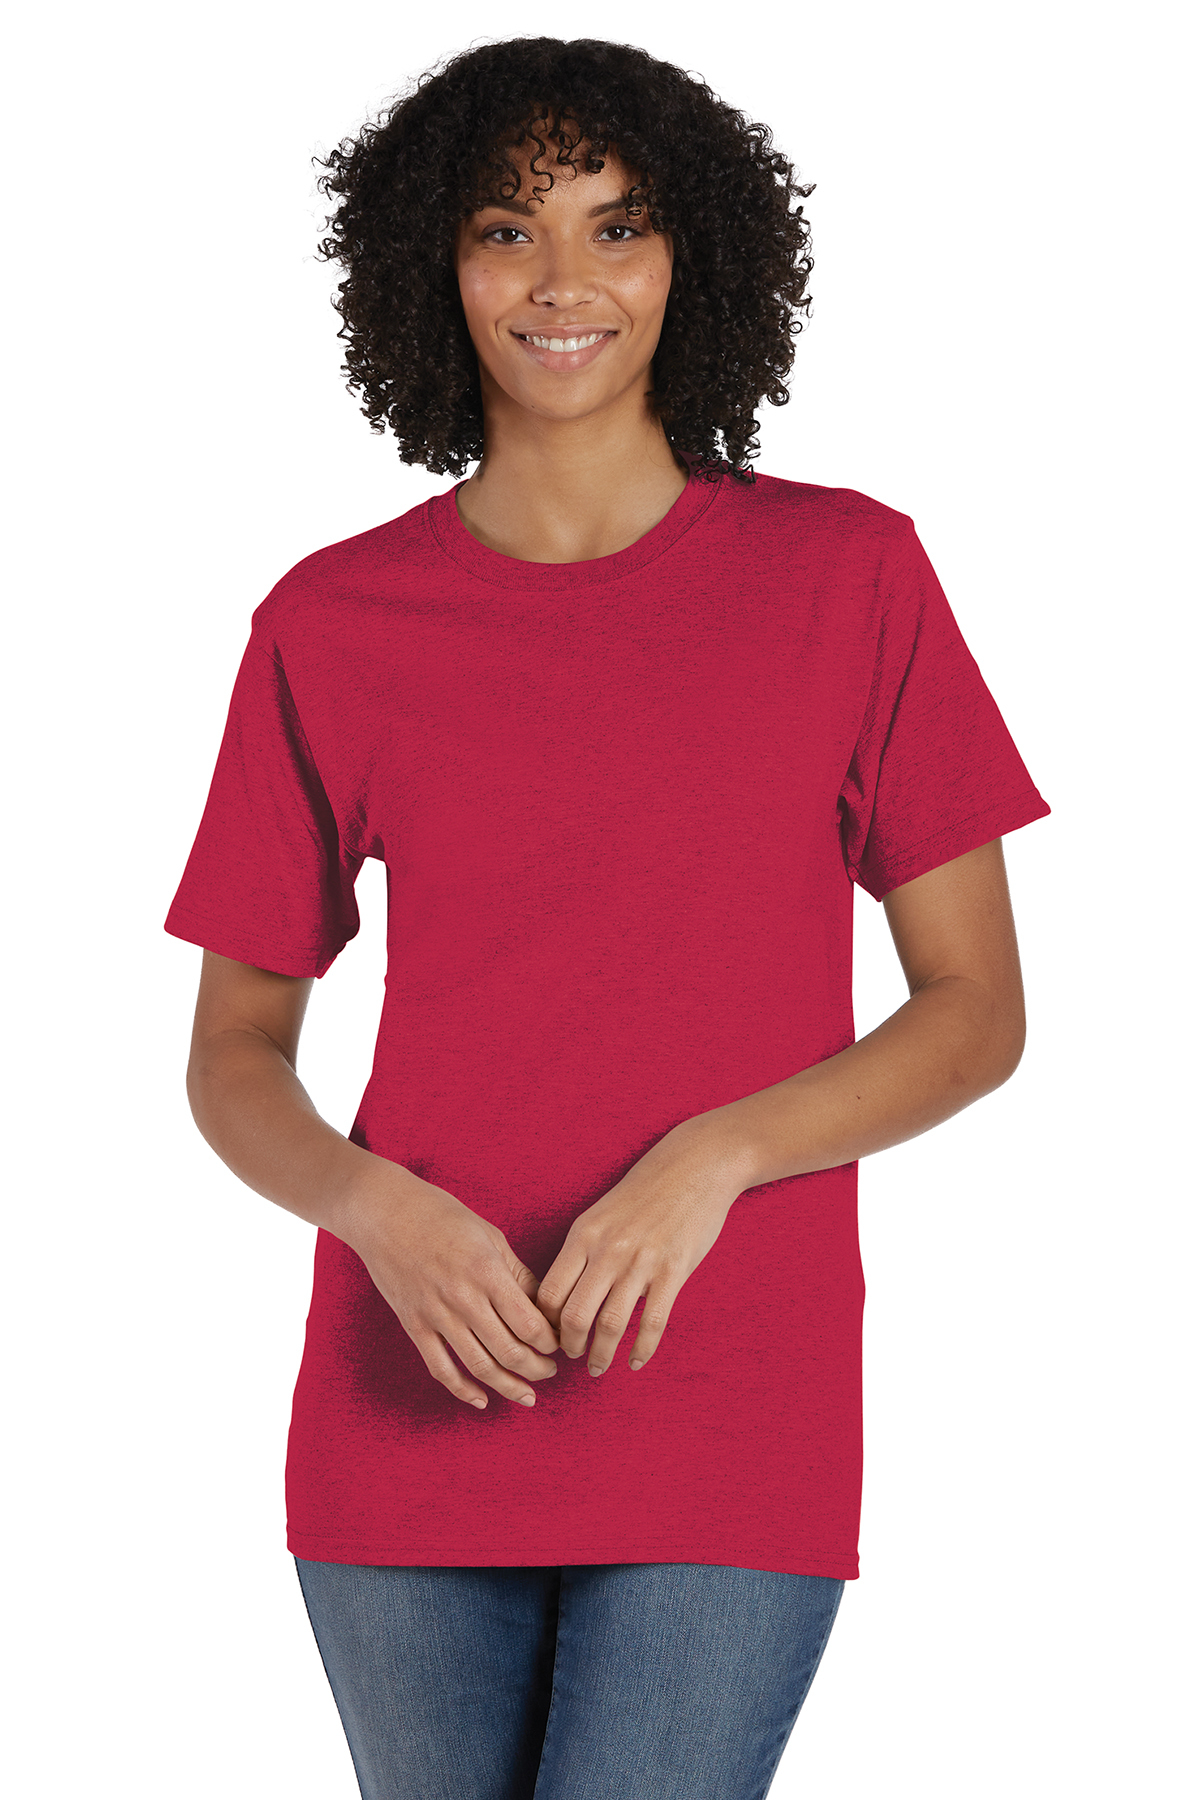 5280 Hanes® ComfortSoft® 100% Cotton T-Shirt - Hit Promotional Products